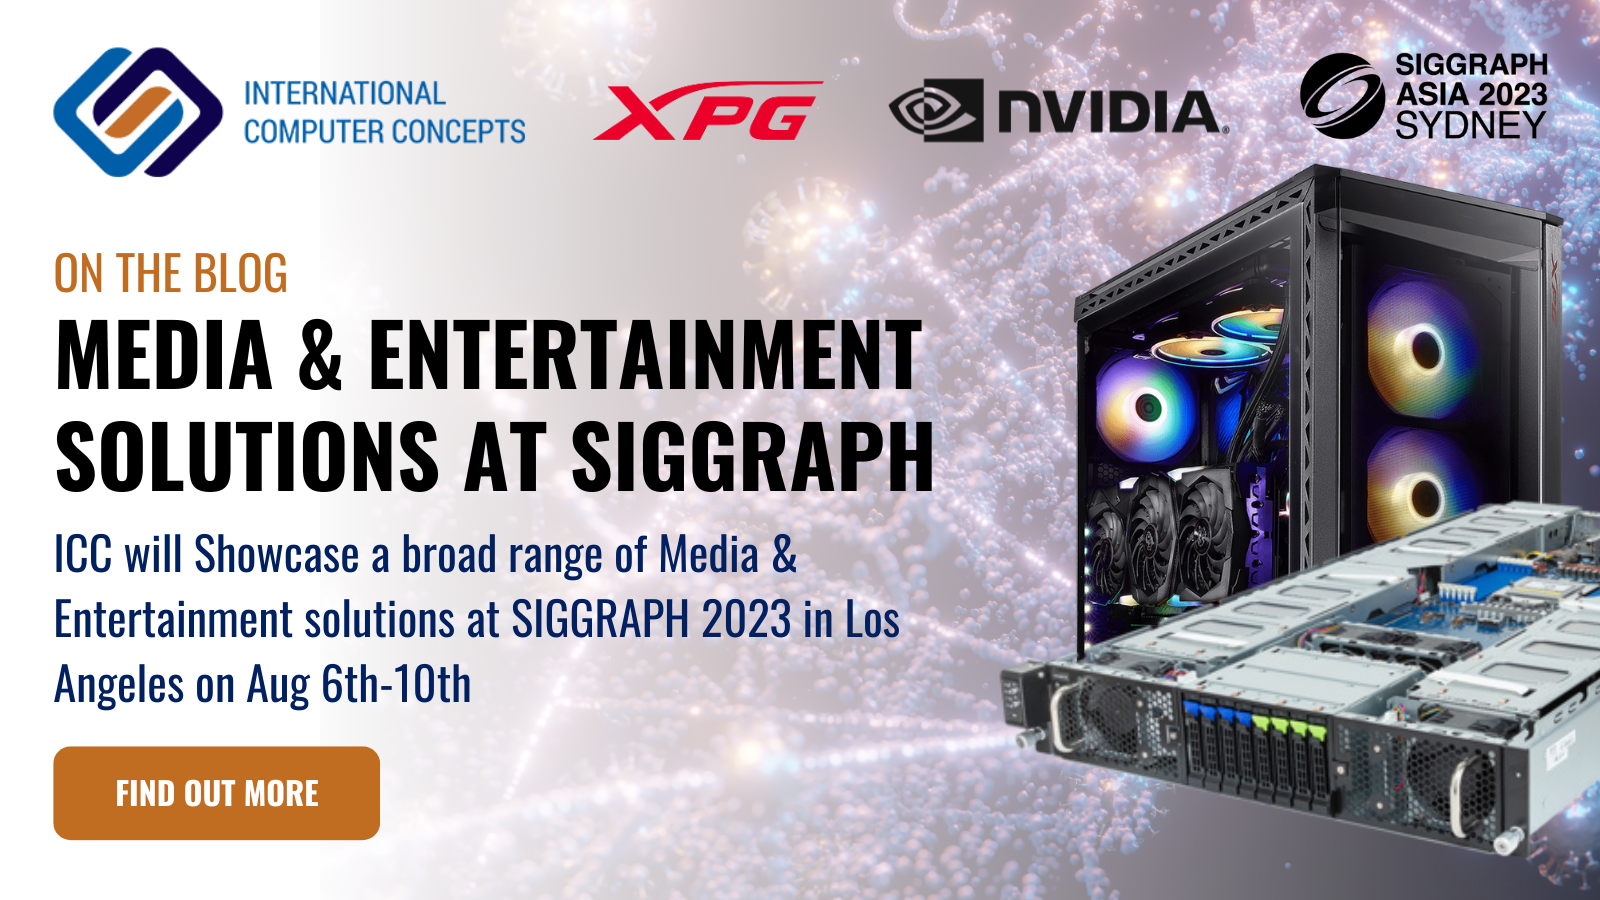 ICC to showcase a range of Broadcast and Media Solutions at SIGGRAPH 2023